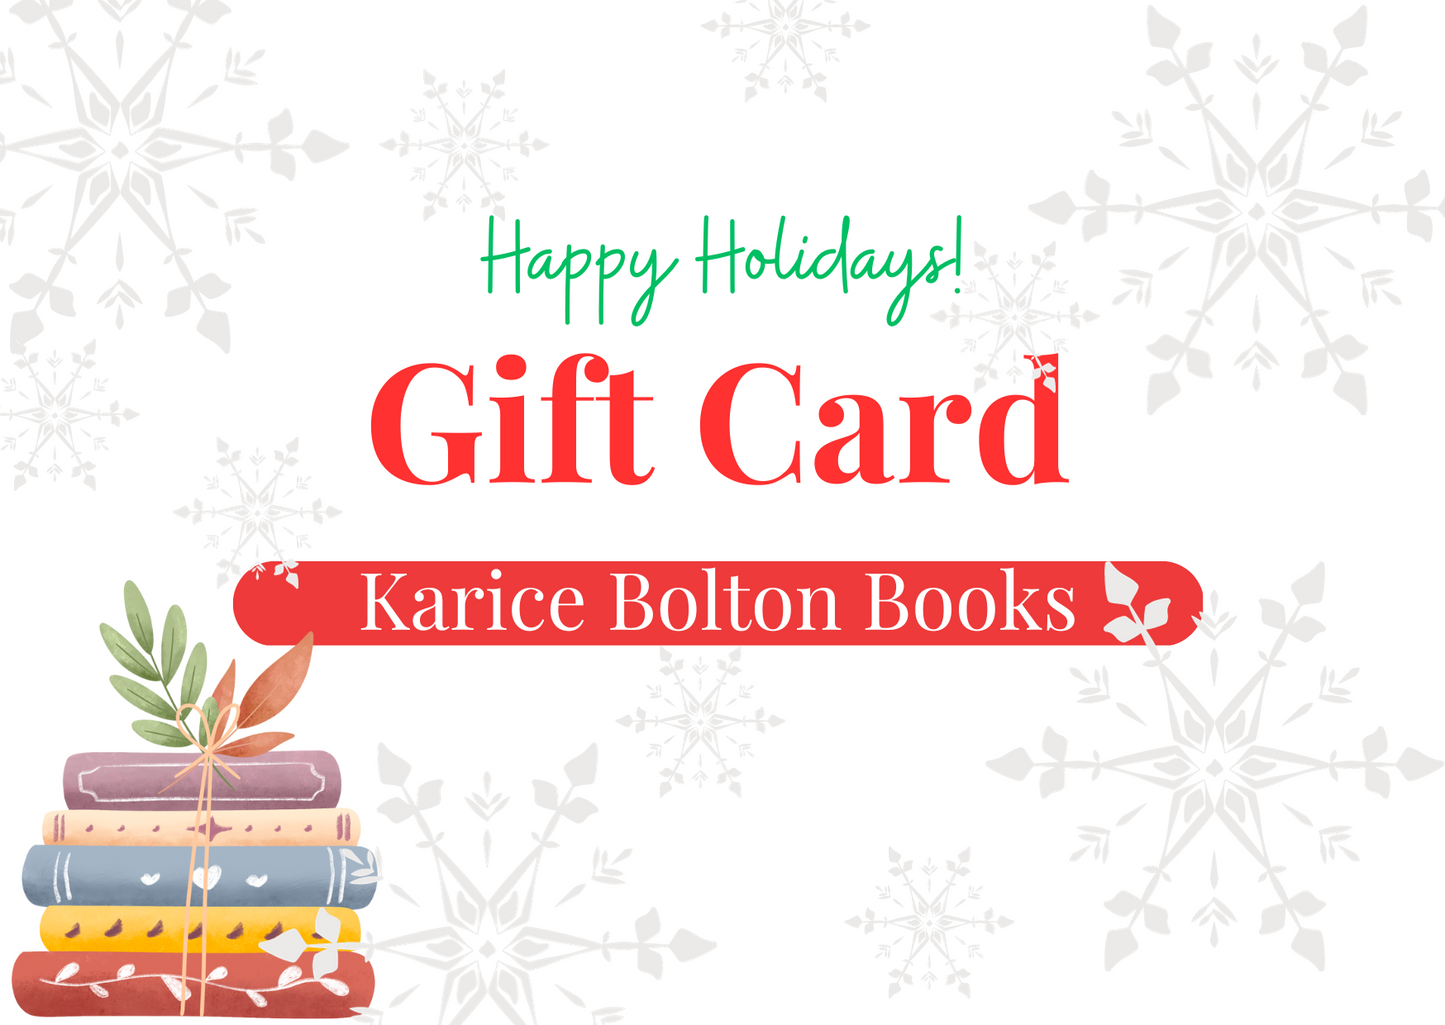 Holiday Karice Bolton Books Gift Card